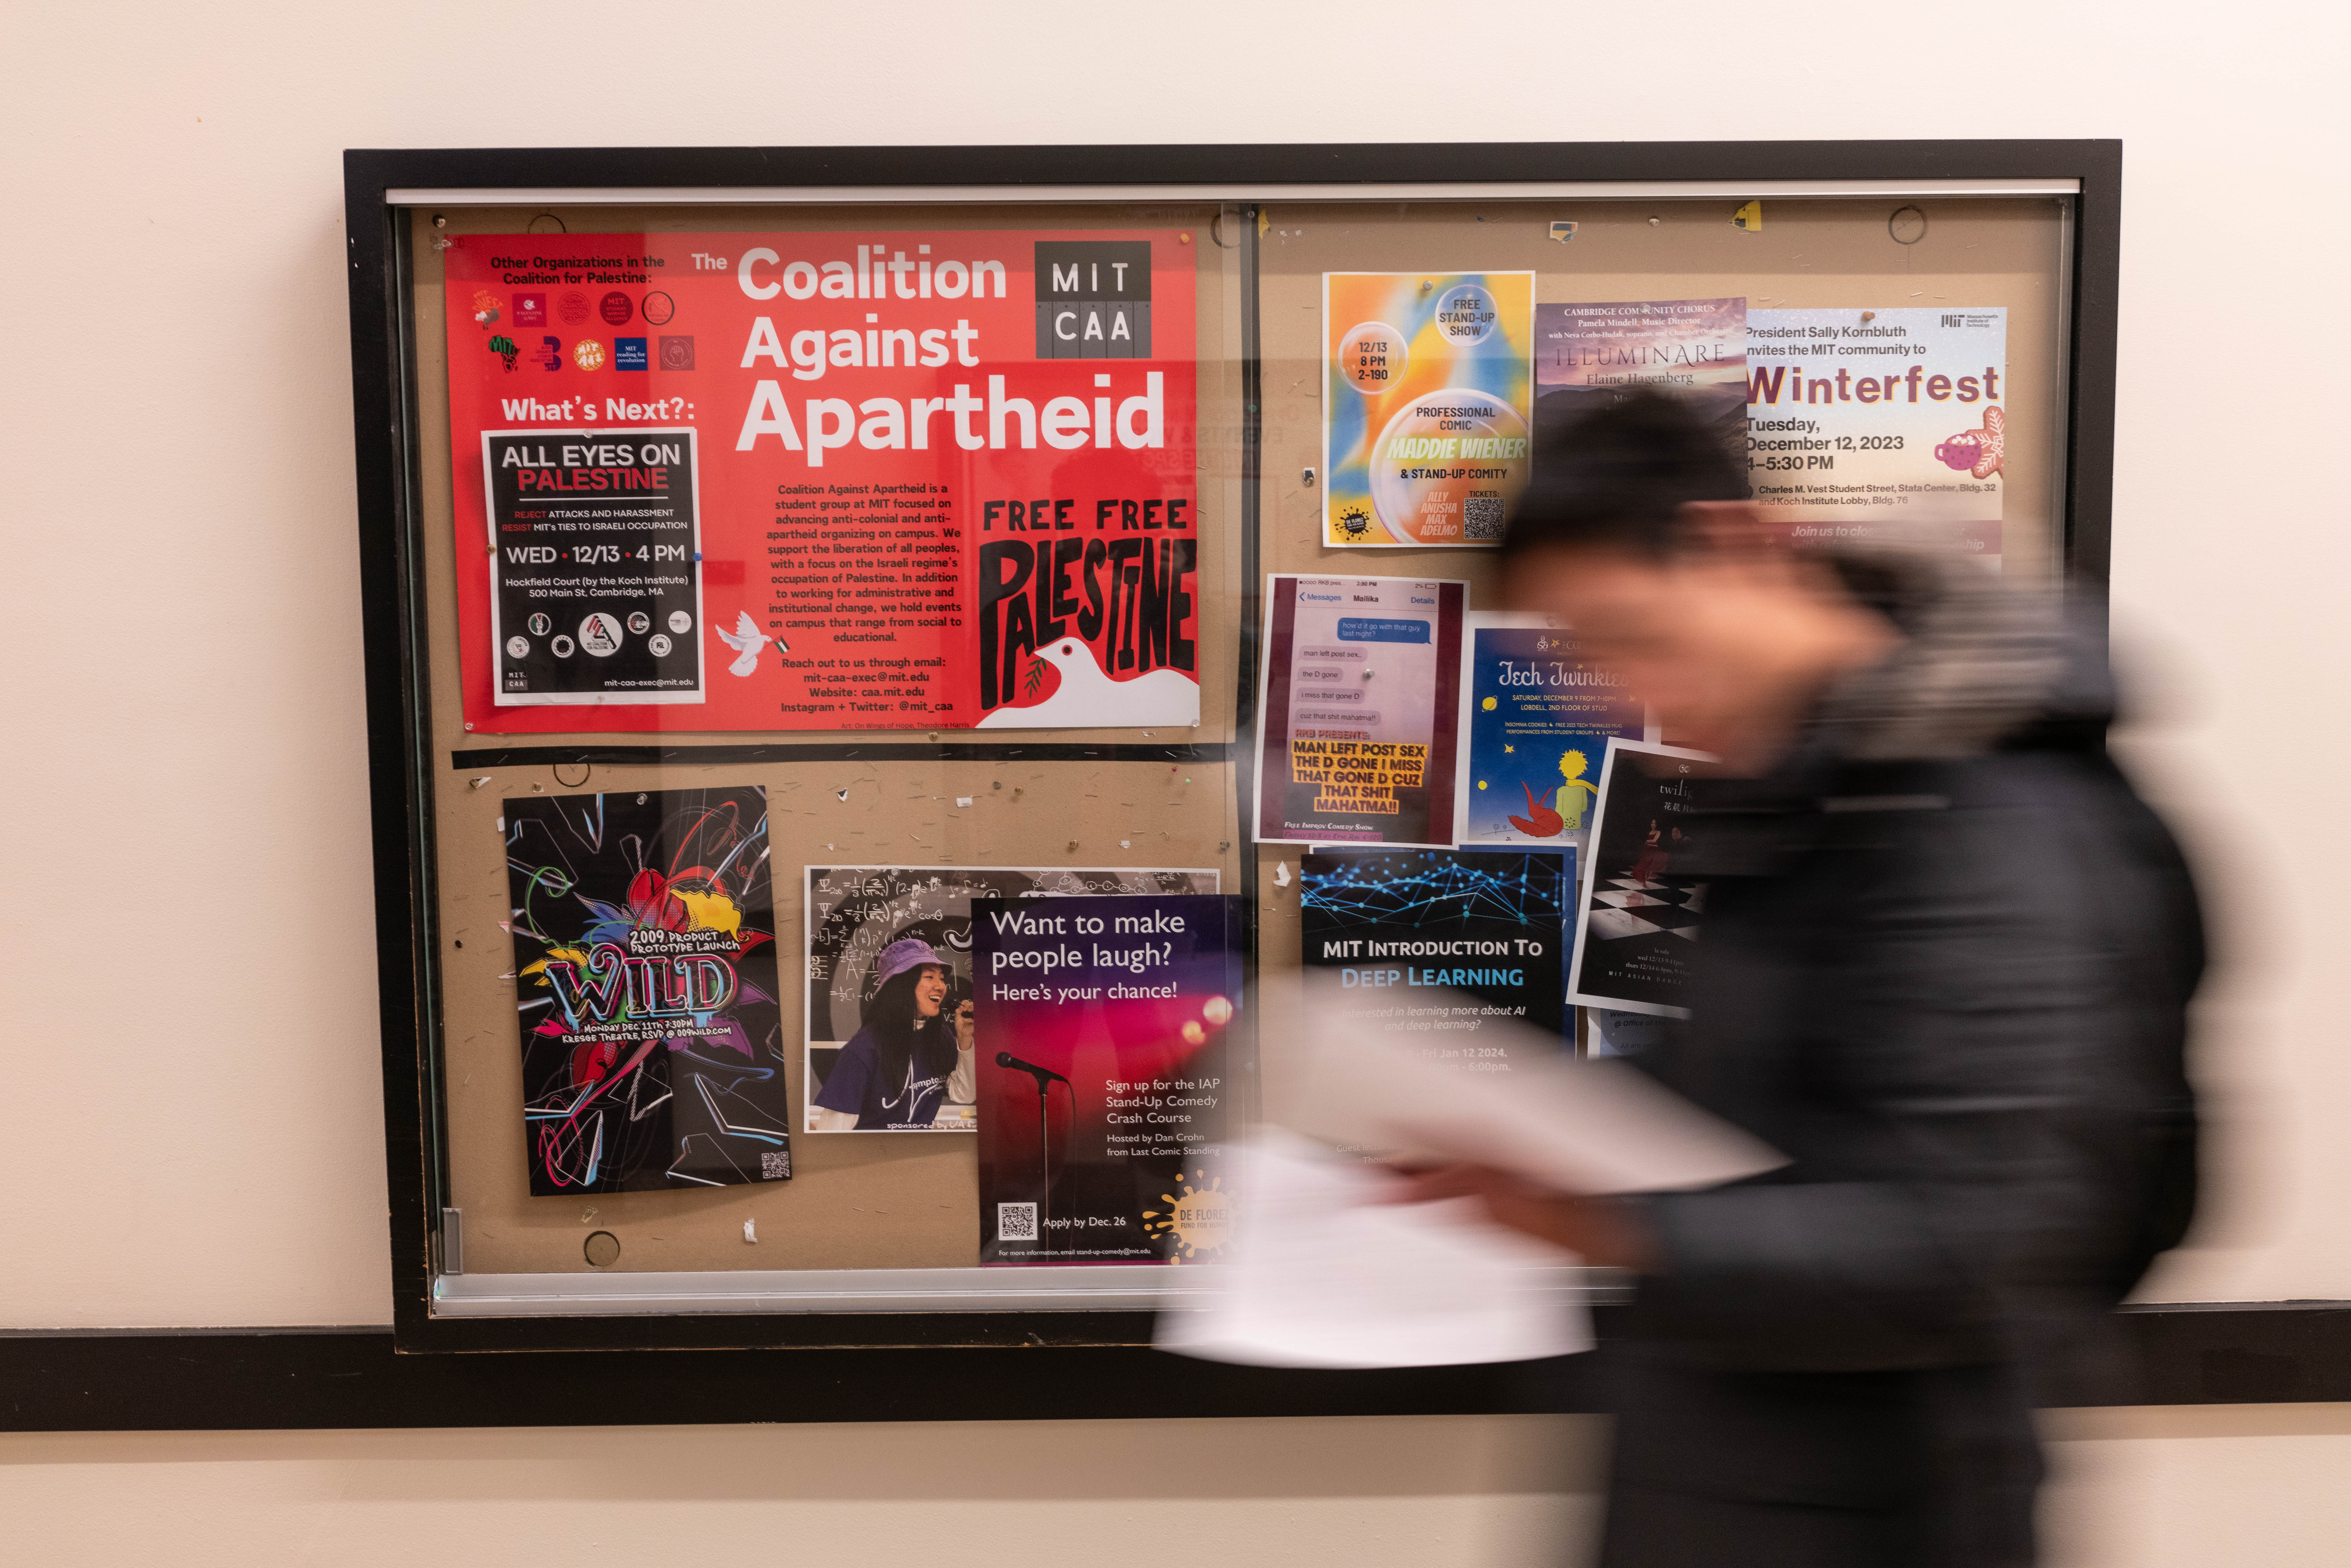 A "Coalition Against Apartheid" poster on the Massachusetts Institute of Technology campus in Cambridge, Mass. on Tuesday, Dec. 12, 2023